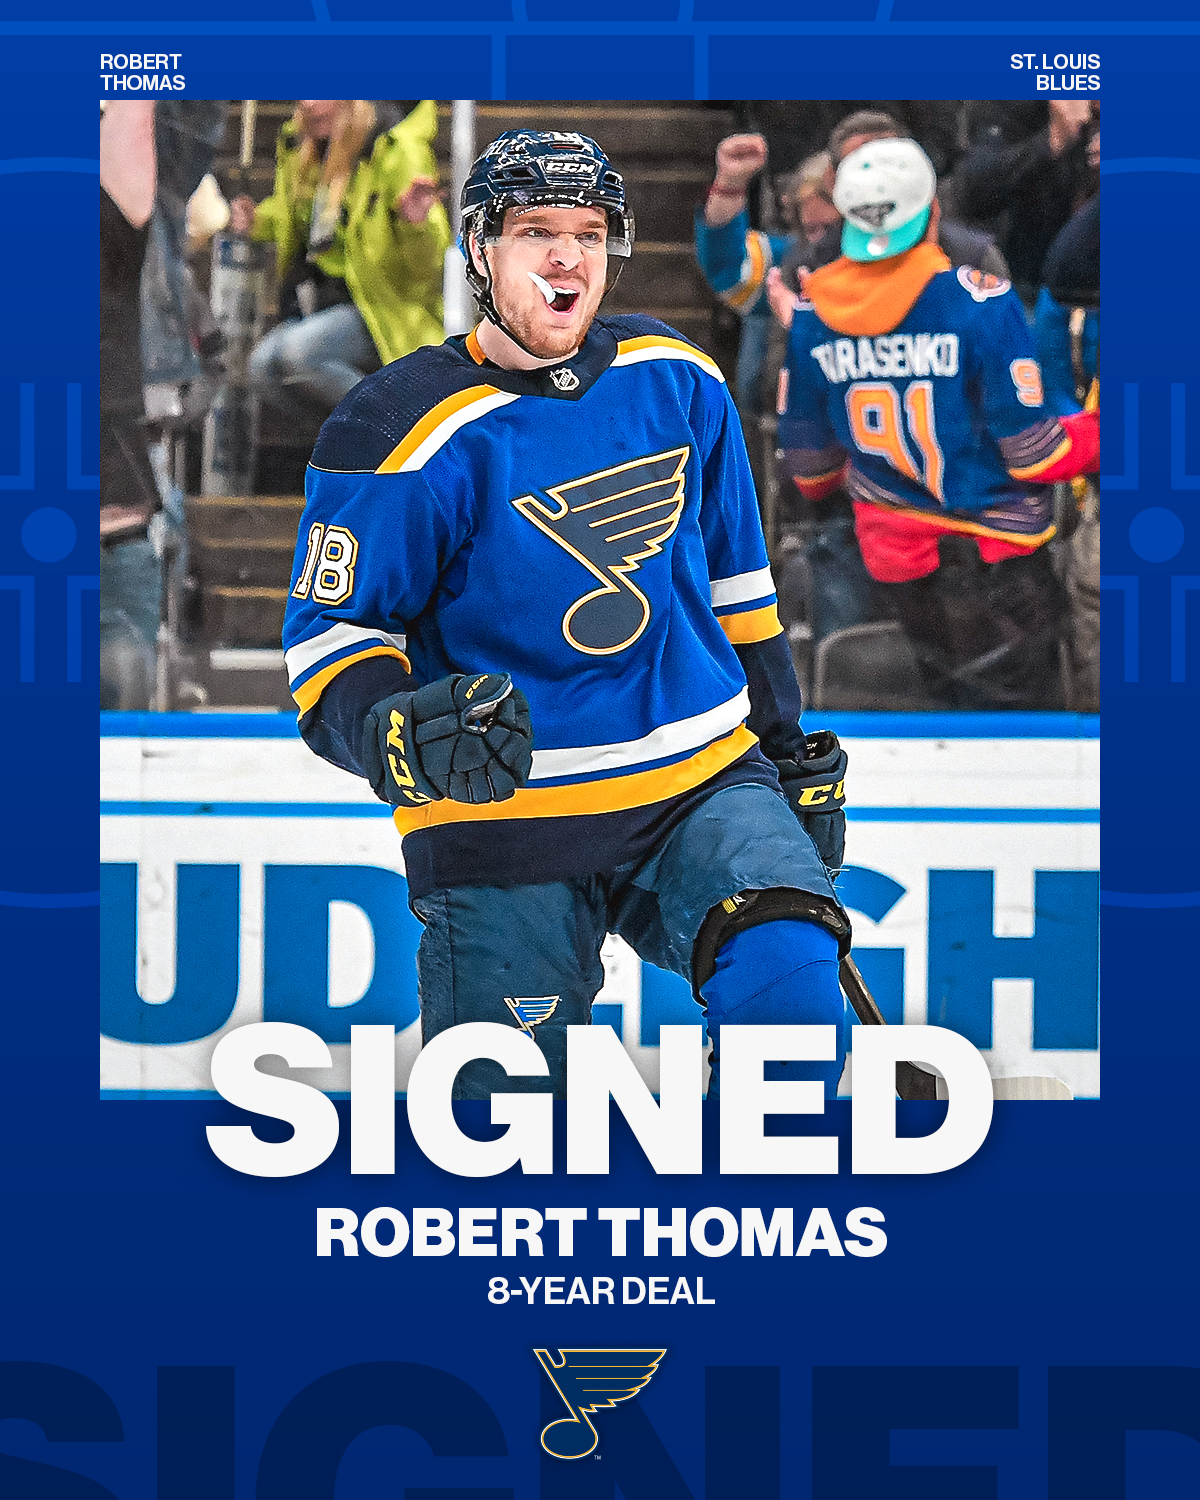 Robert Thomas scores first NHL goal, Happy anniversary of your first  career NHL goal, Tommer!, By St. Louis Blues